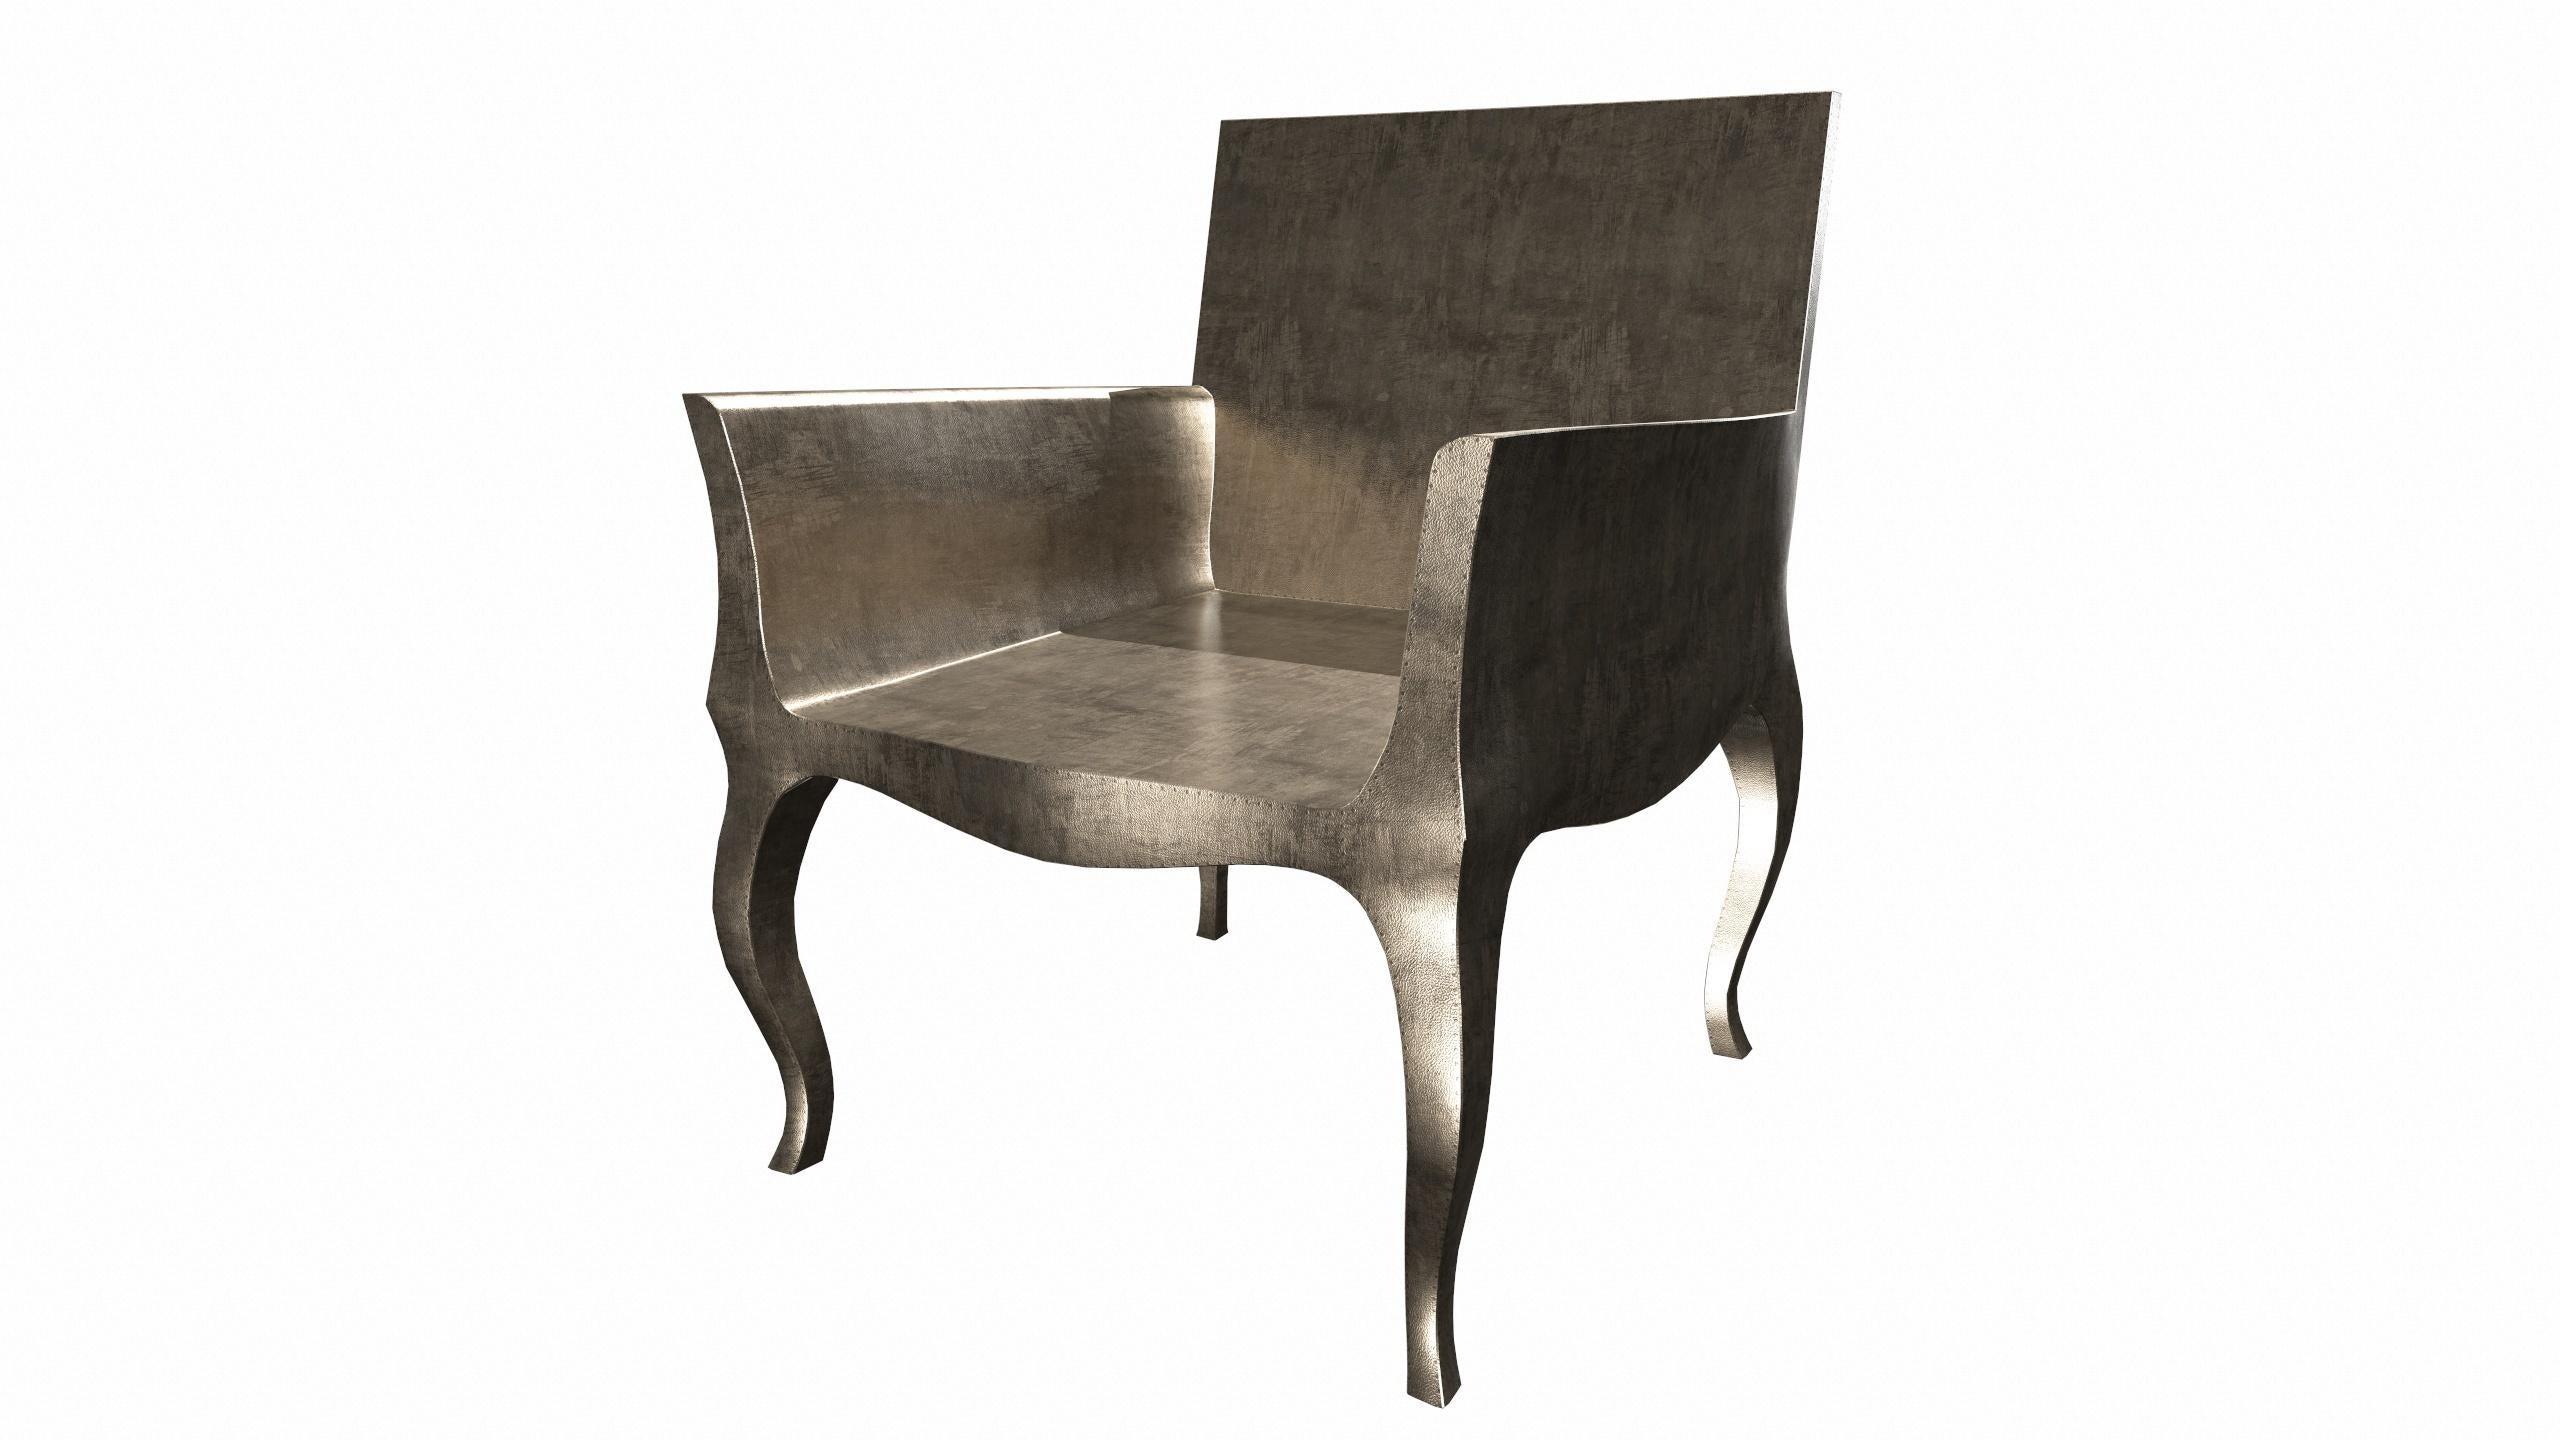 Patinated Deco Chairs Fine Hammered in Antique White Bronze by Paul Mathieu For Sale